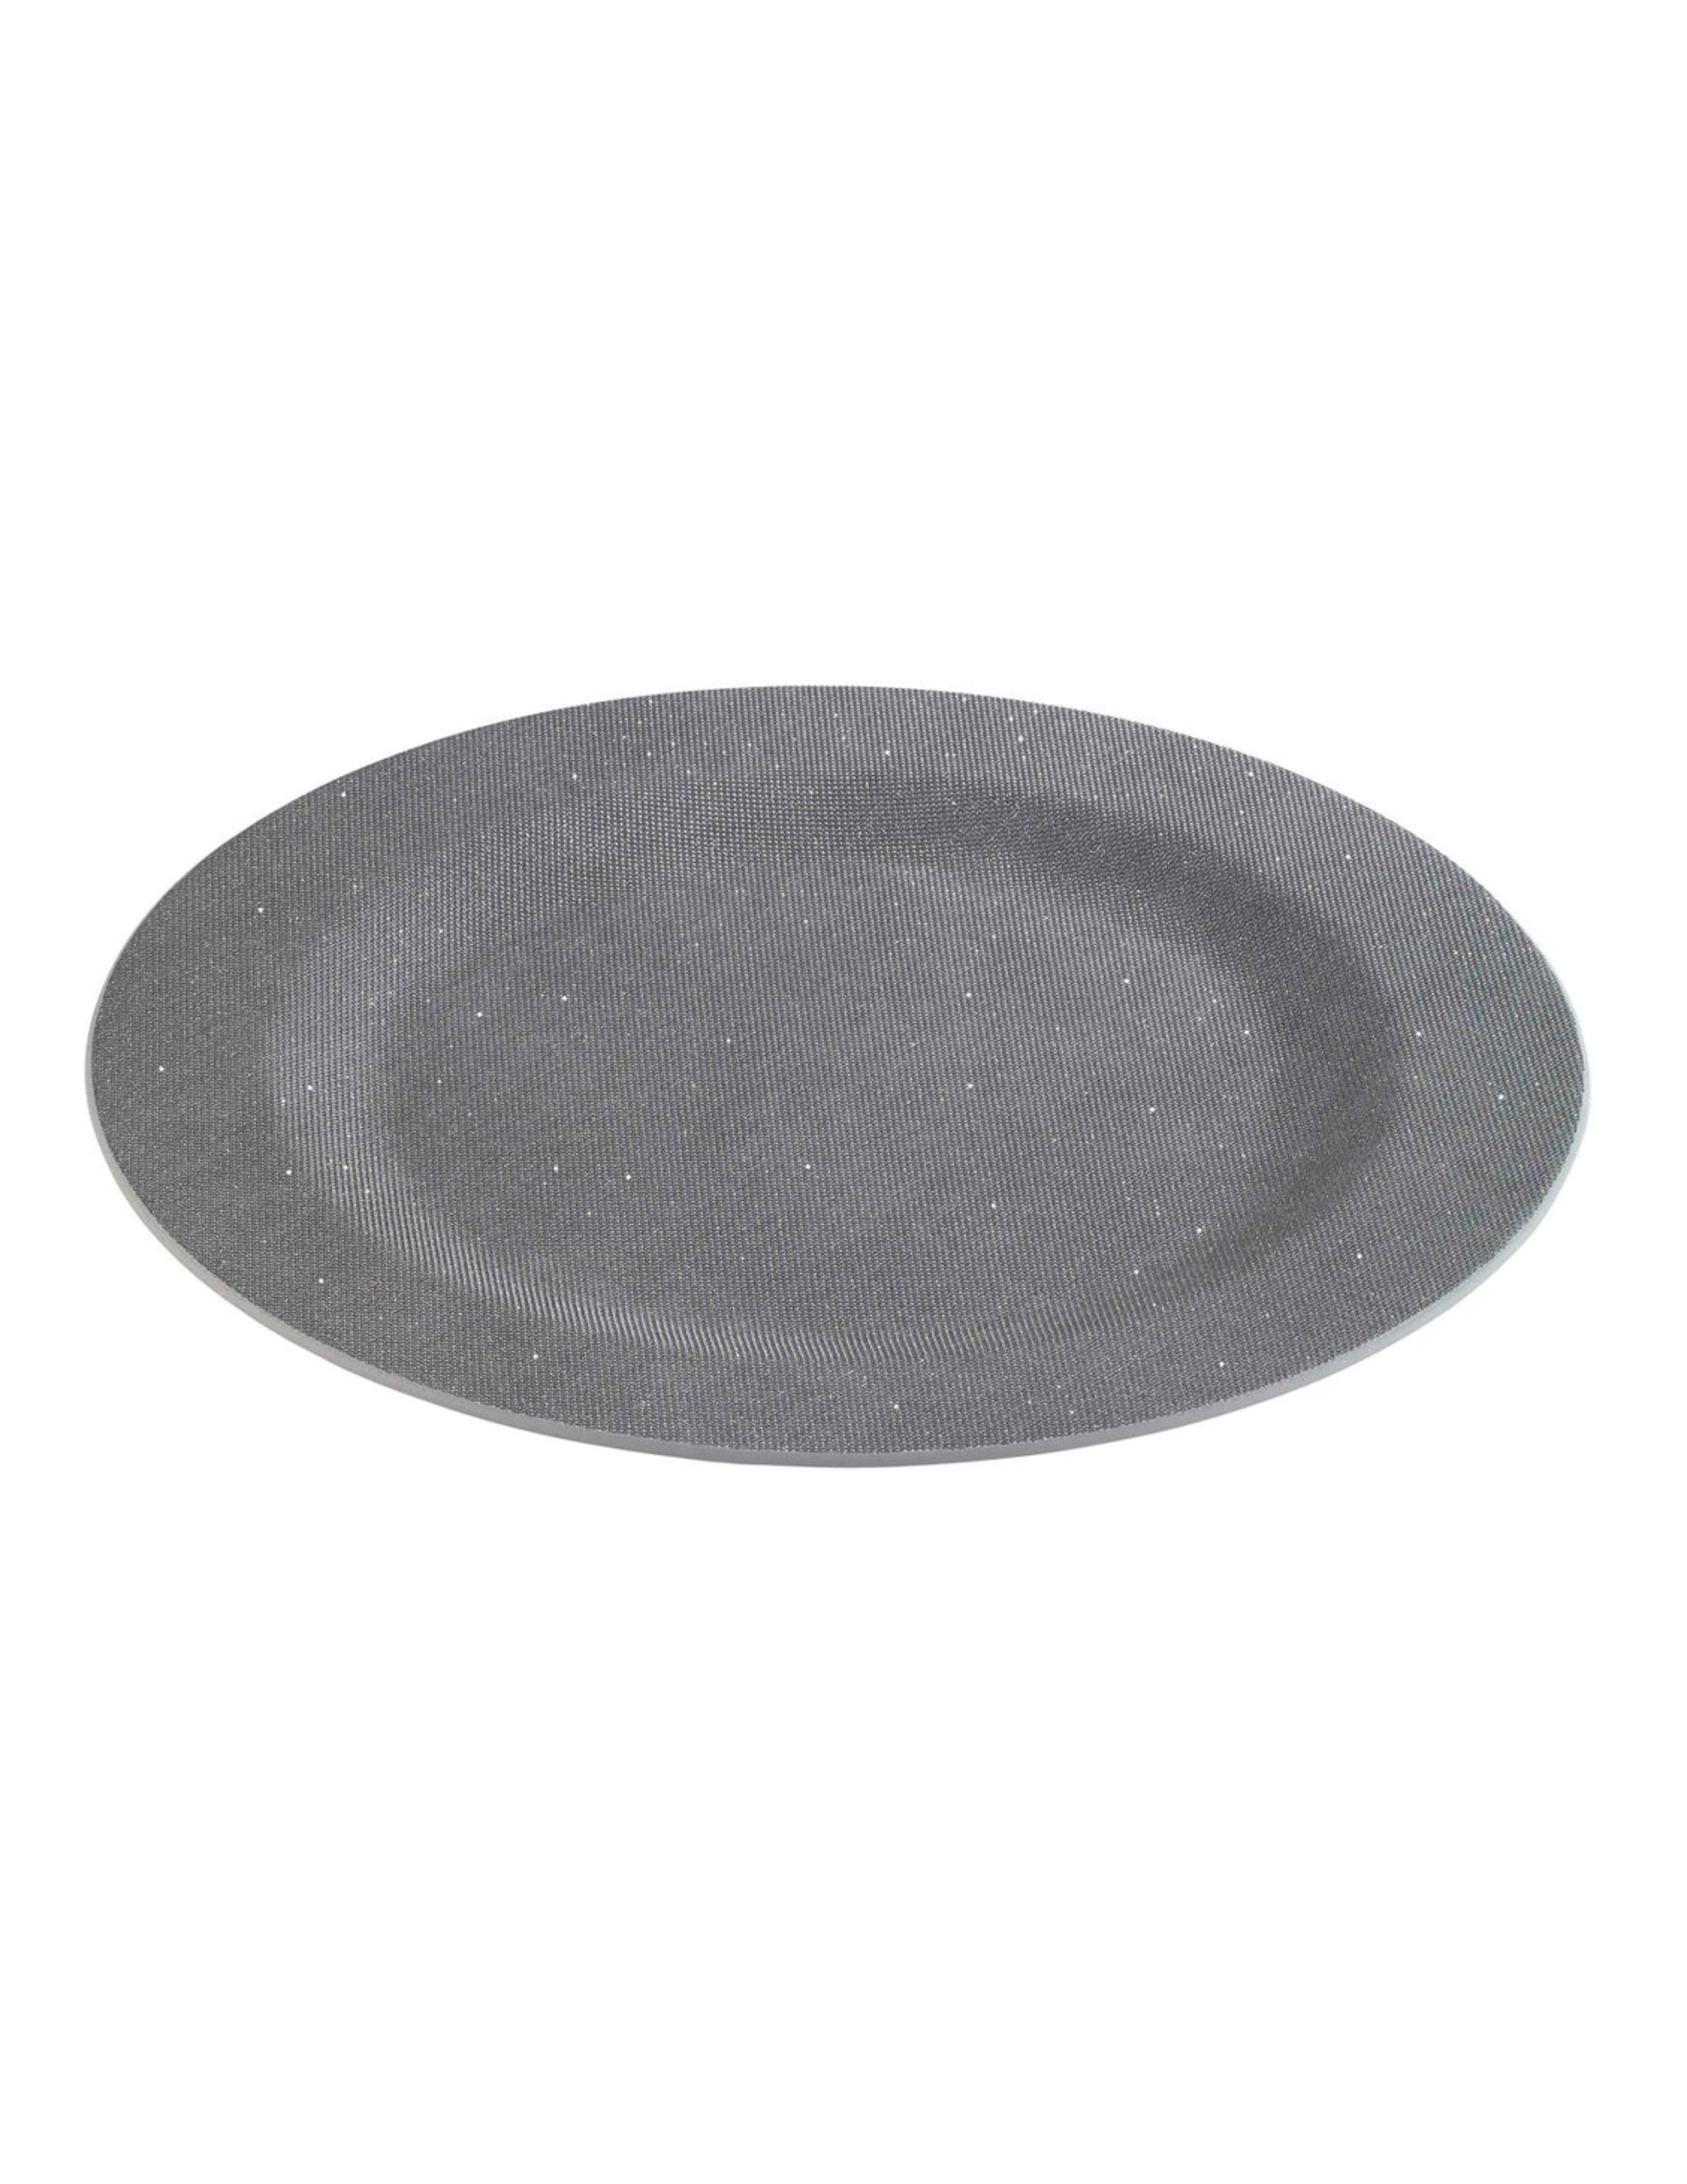 Gem Charger Plate Set of 4 - Silver